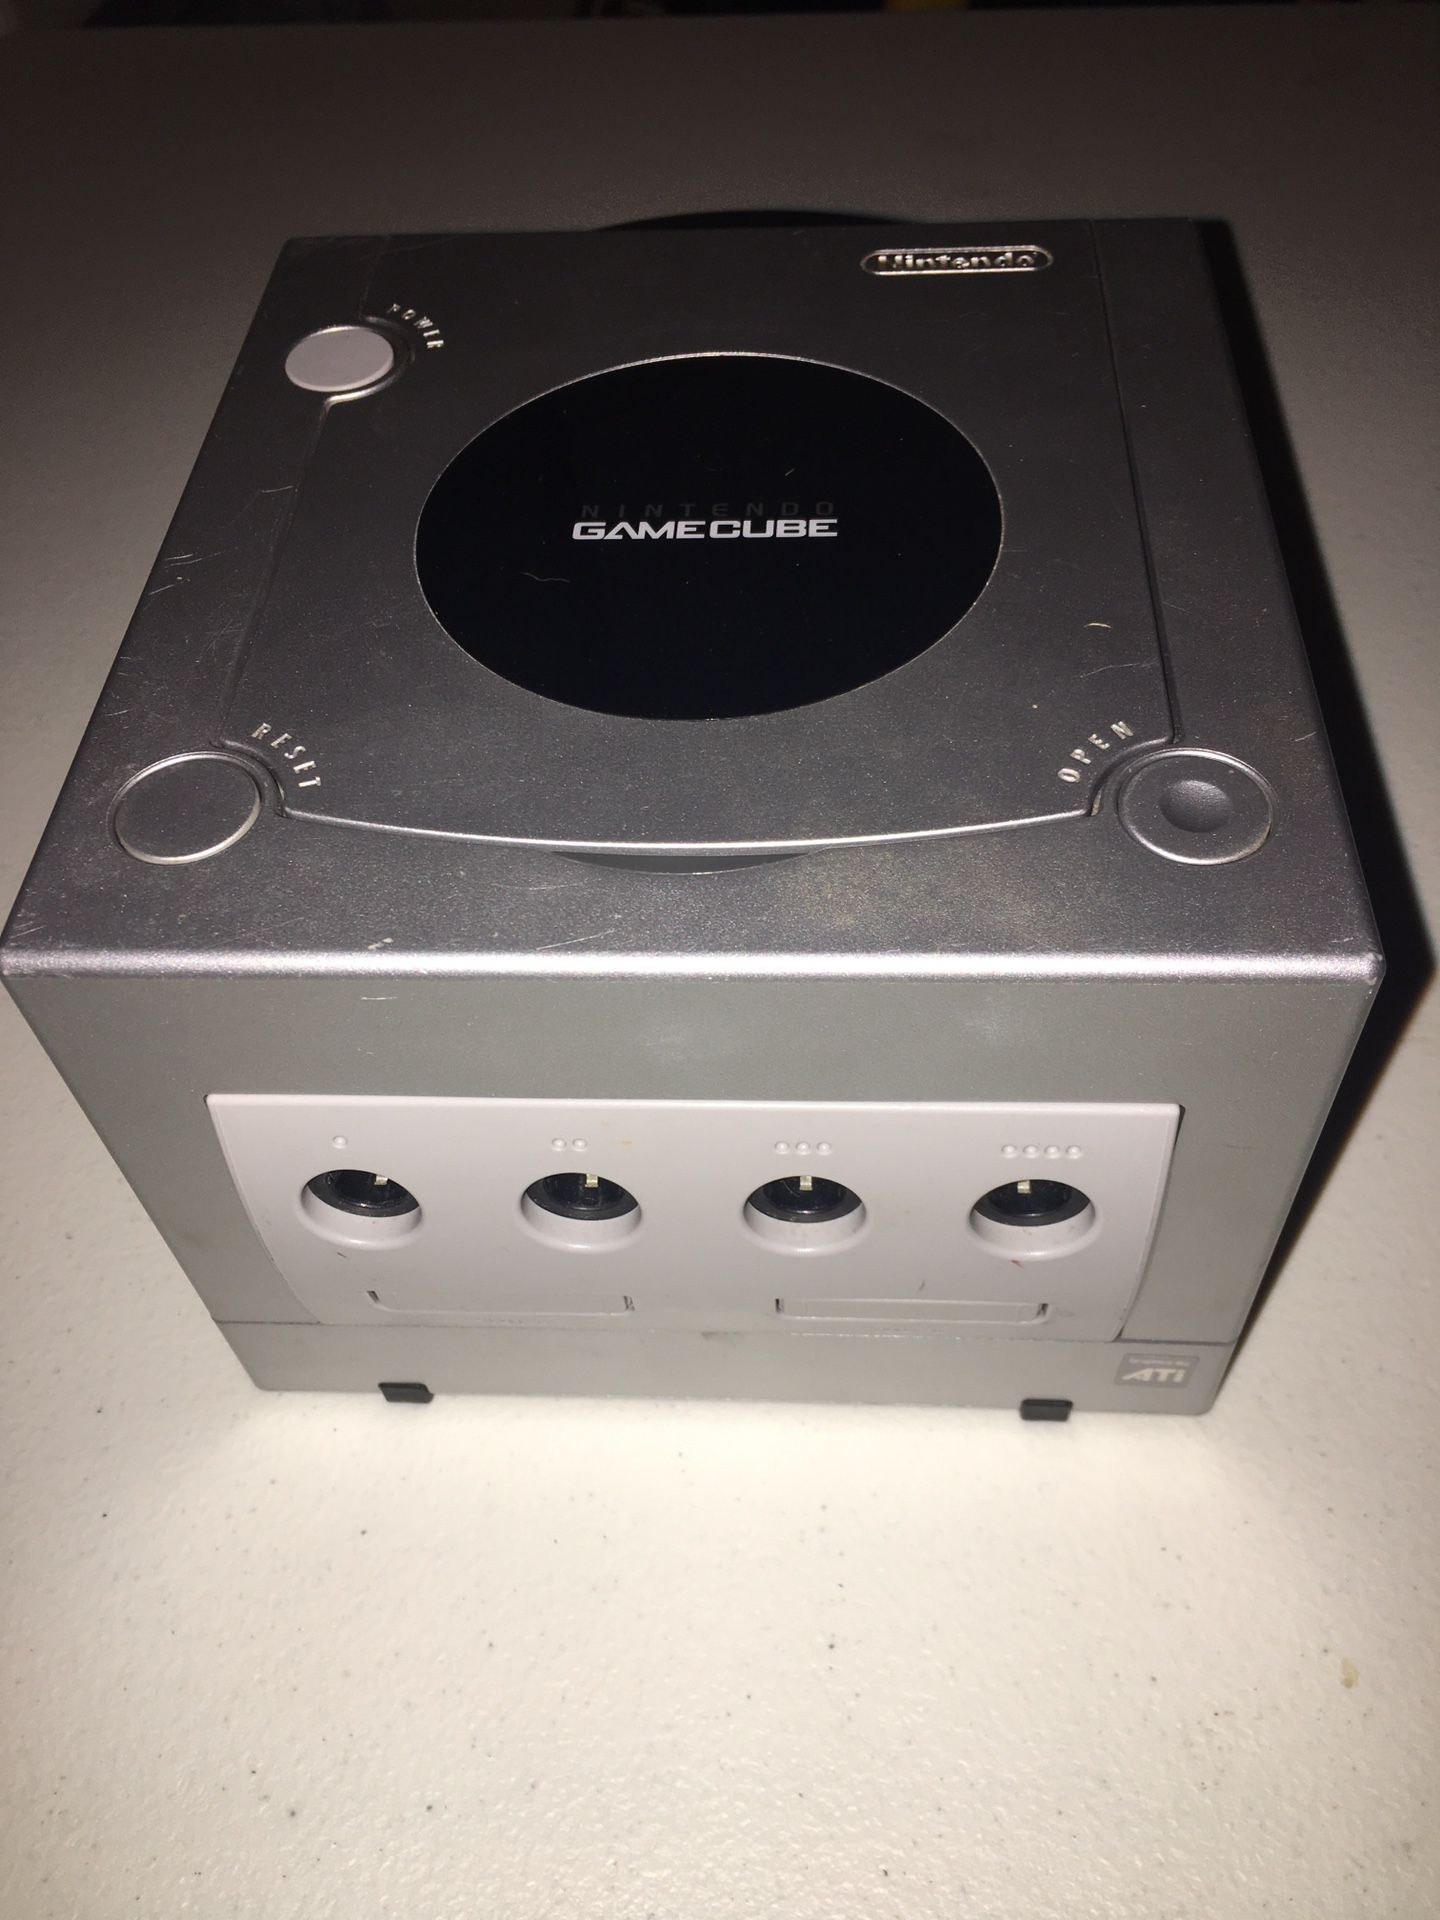 Nintendo GameCube only. Tested and works.